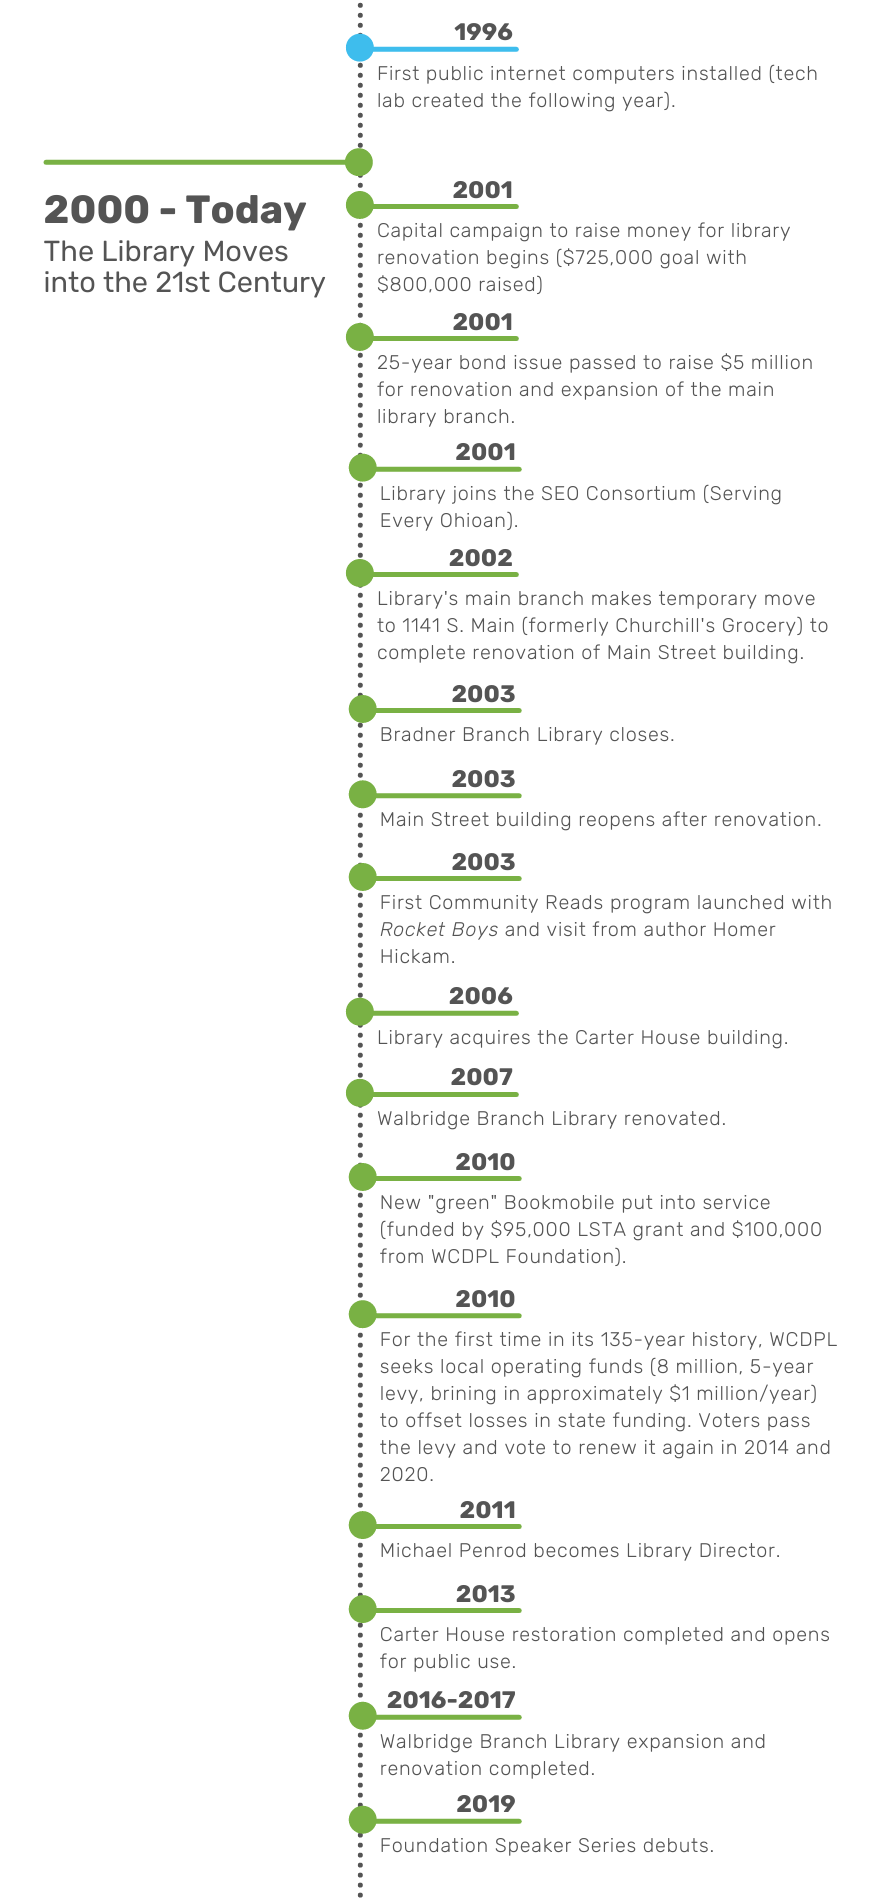 A timeline of WCDPL's history